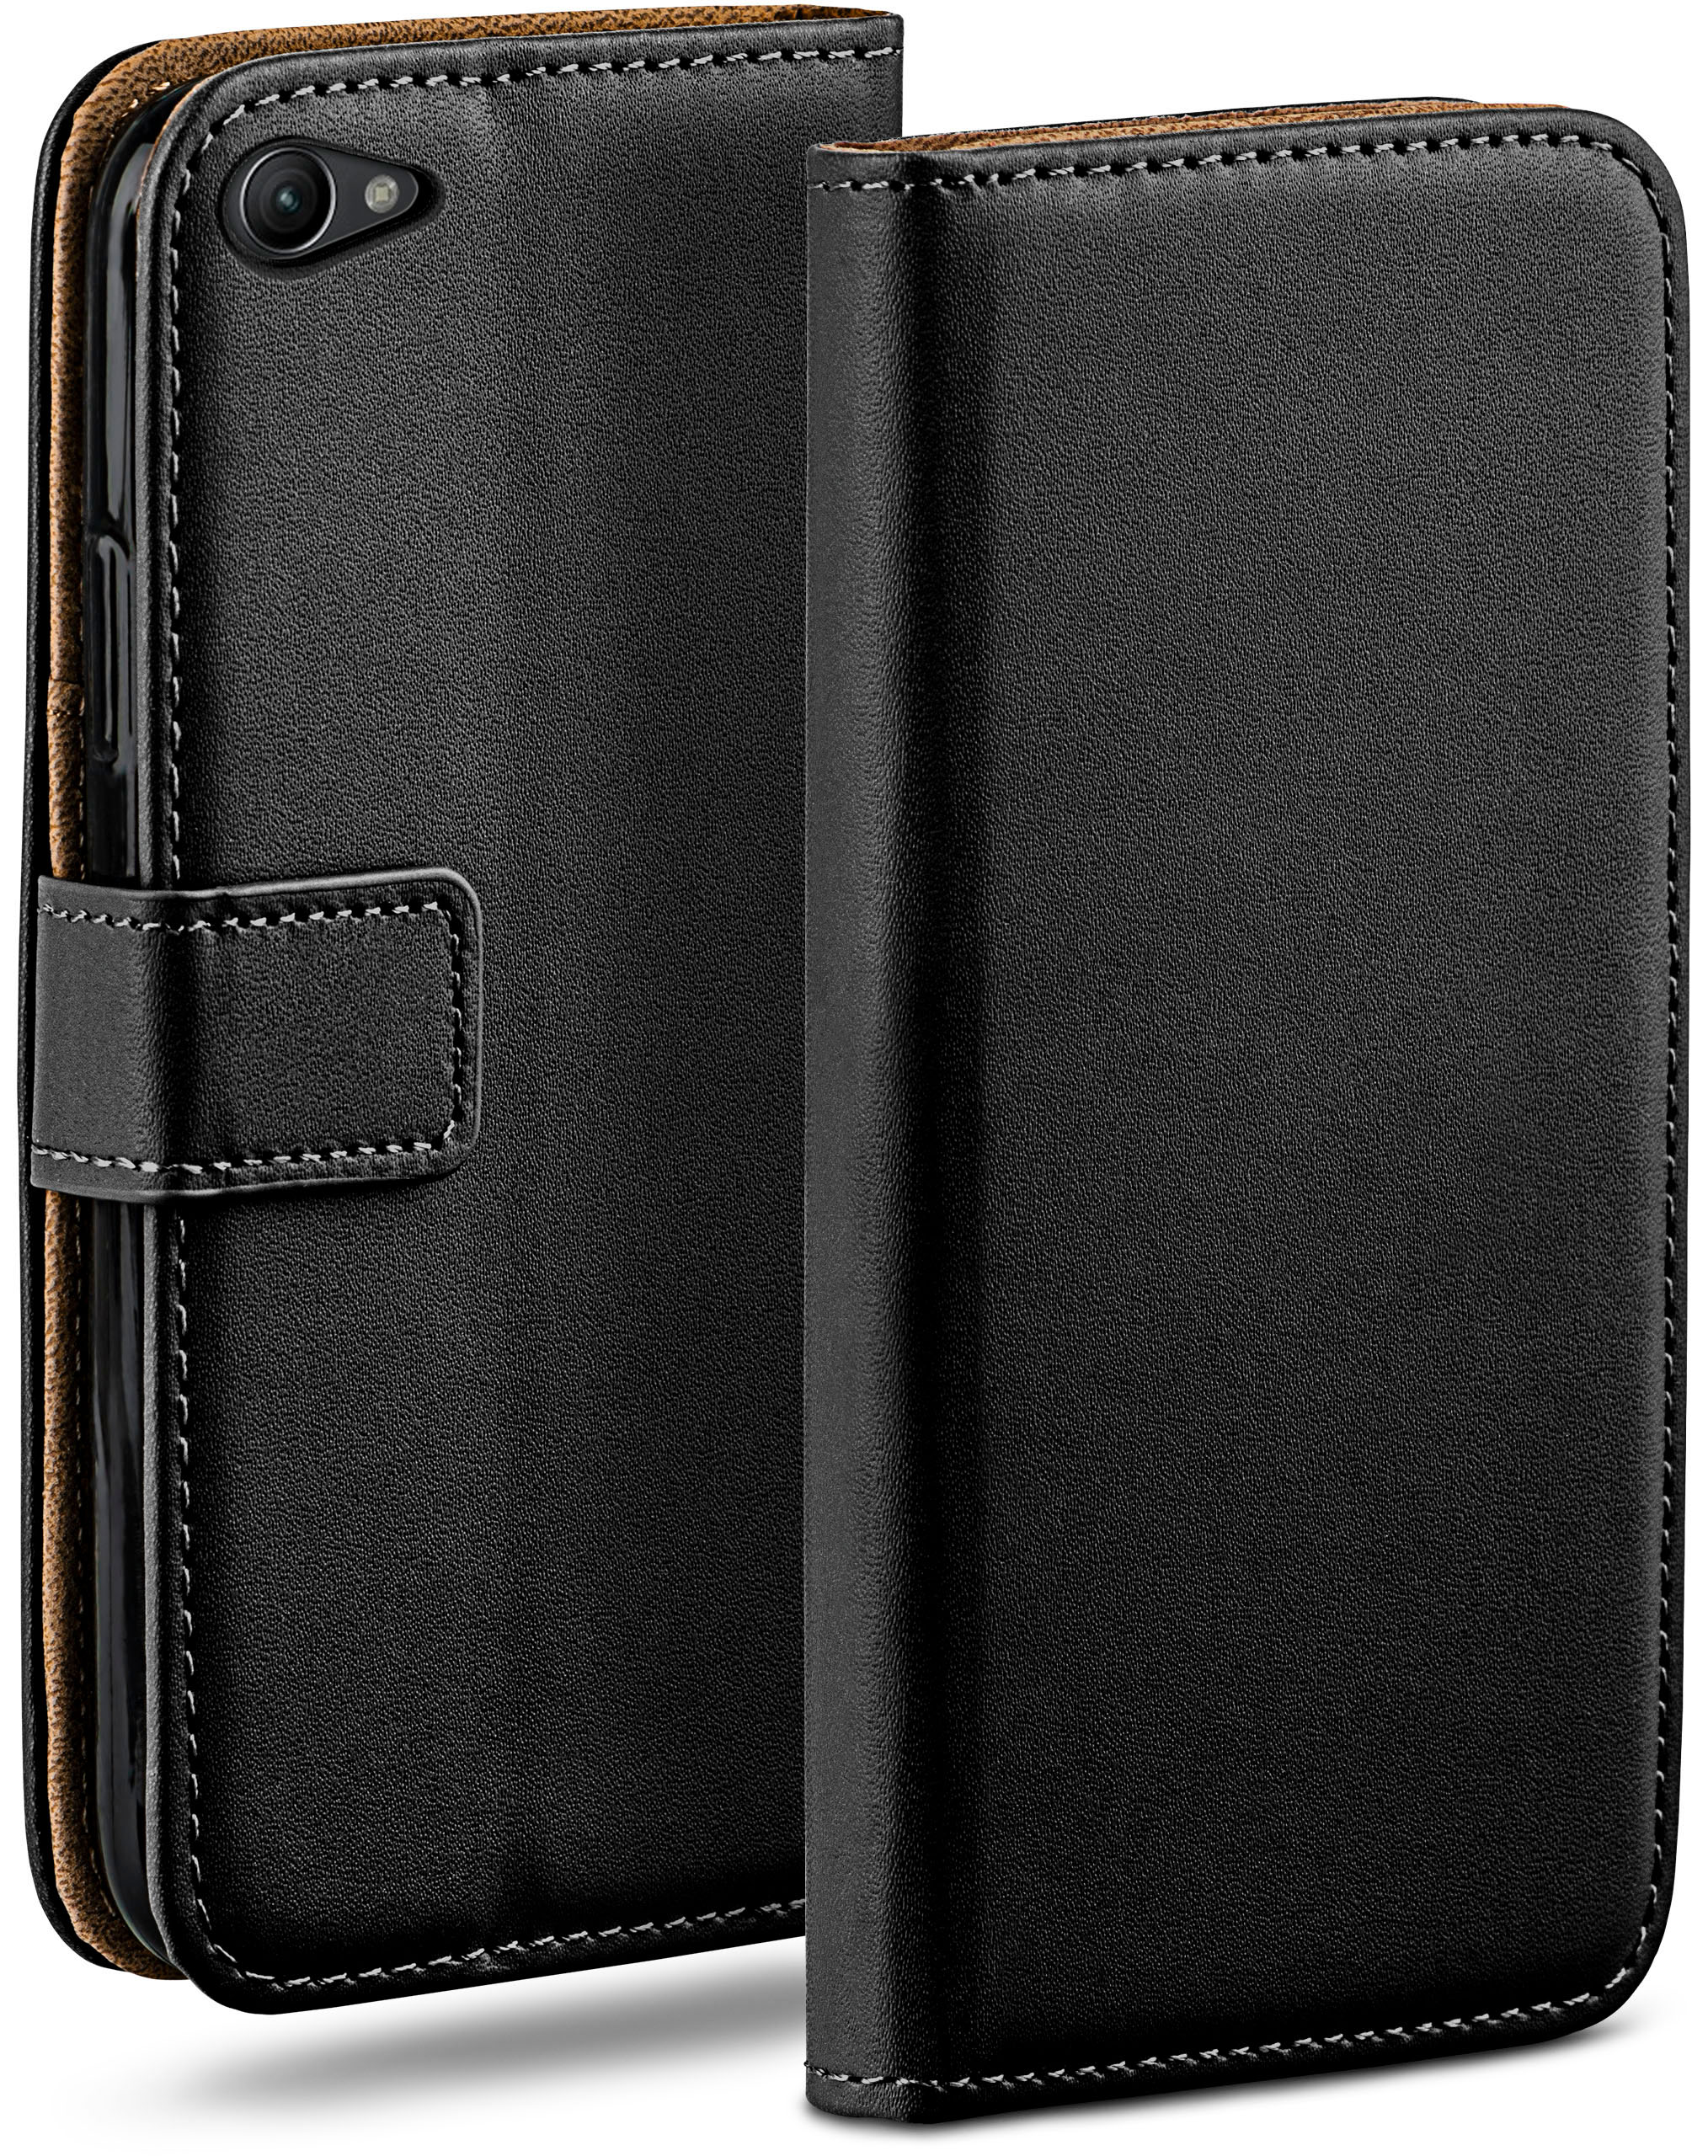 MOEX Book Case, Bookcover, Xperia Deep-Black Compact, Z1 Sony